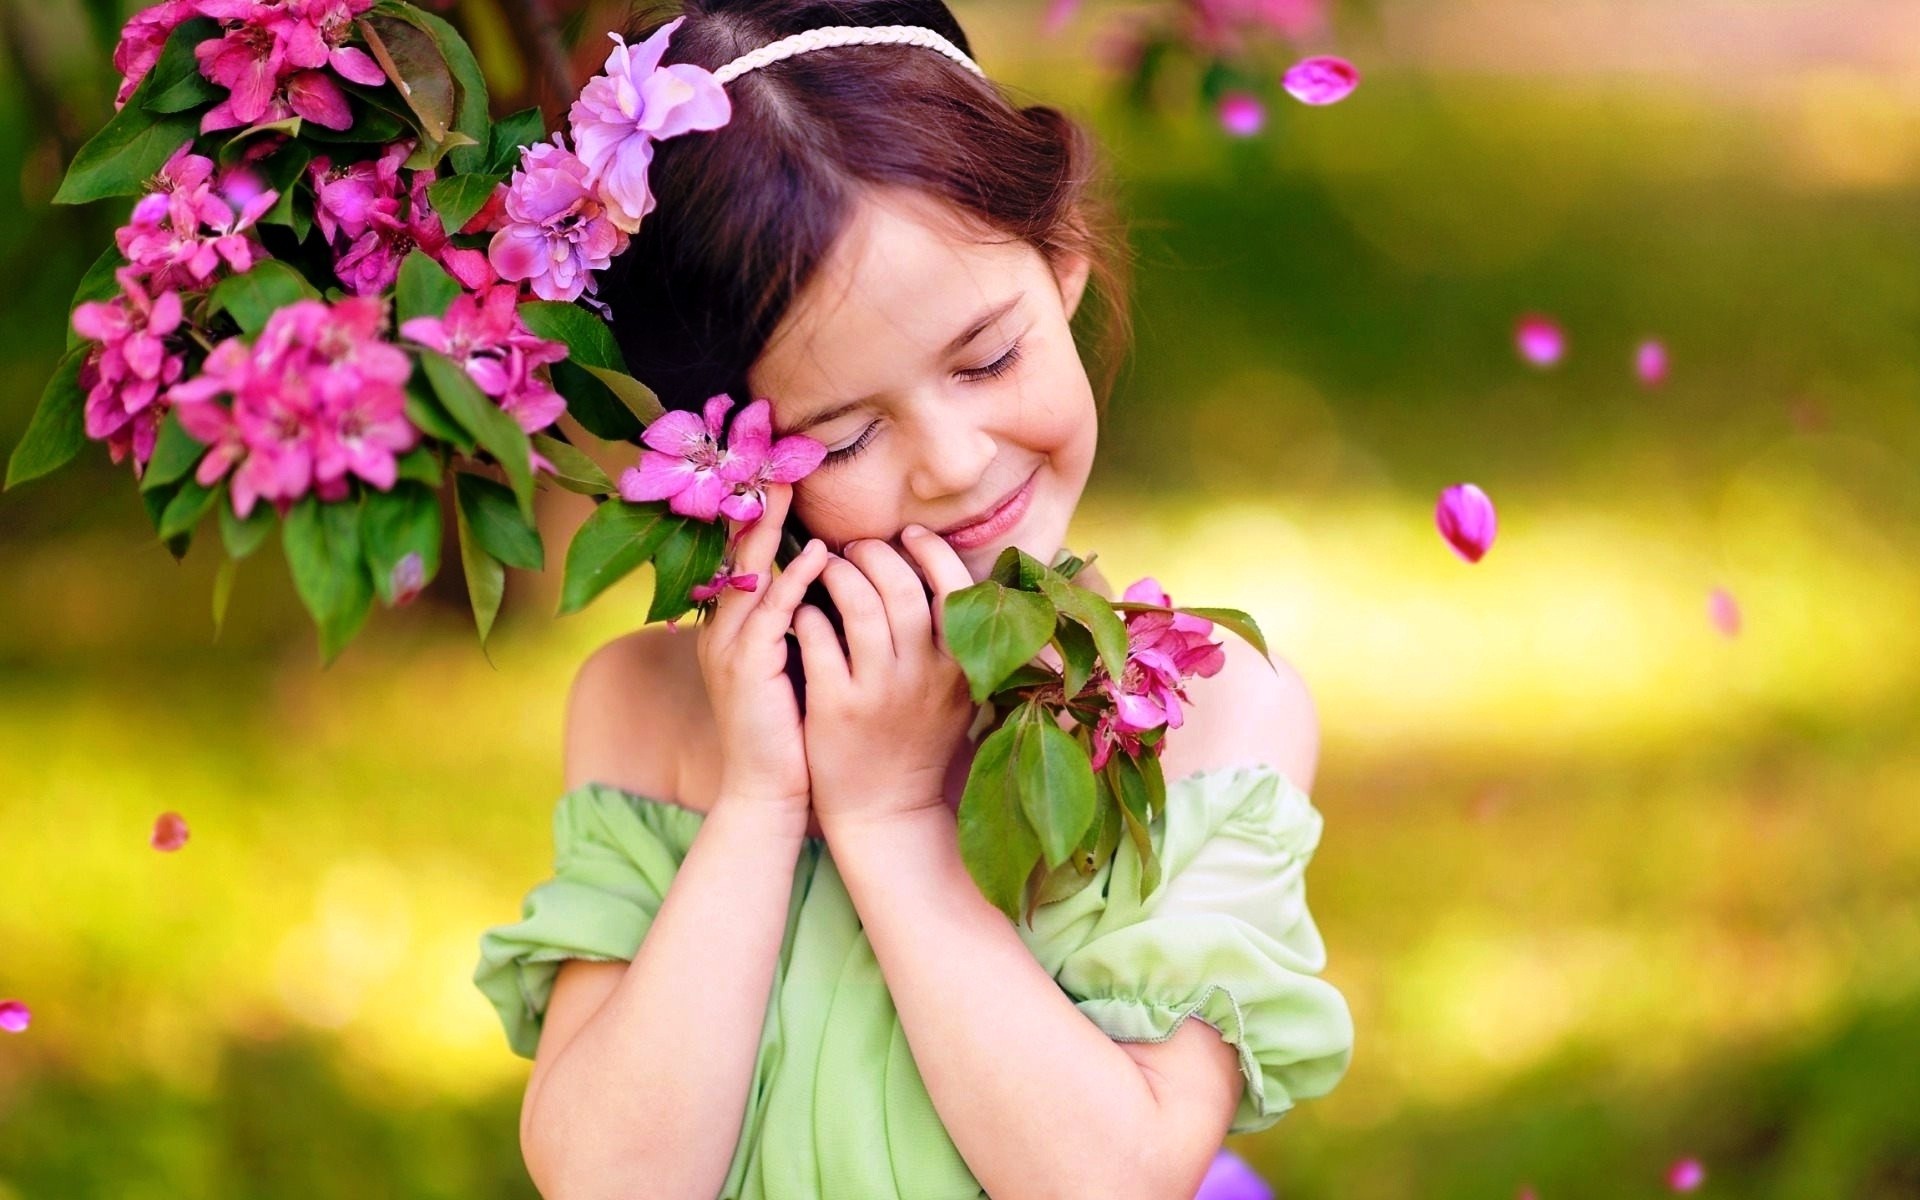 full hd girl wallpapers for mobile,people in nature,nature,child,pink,flower